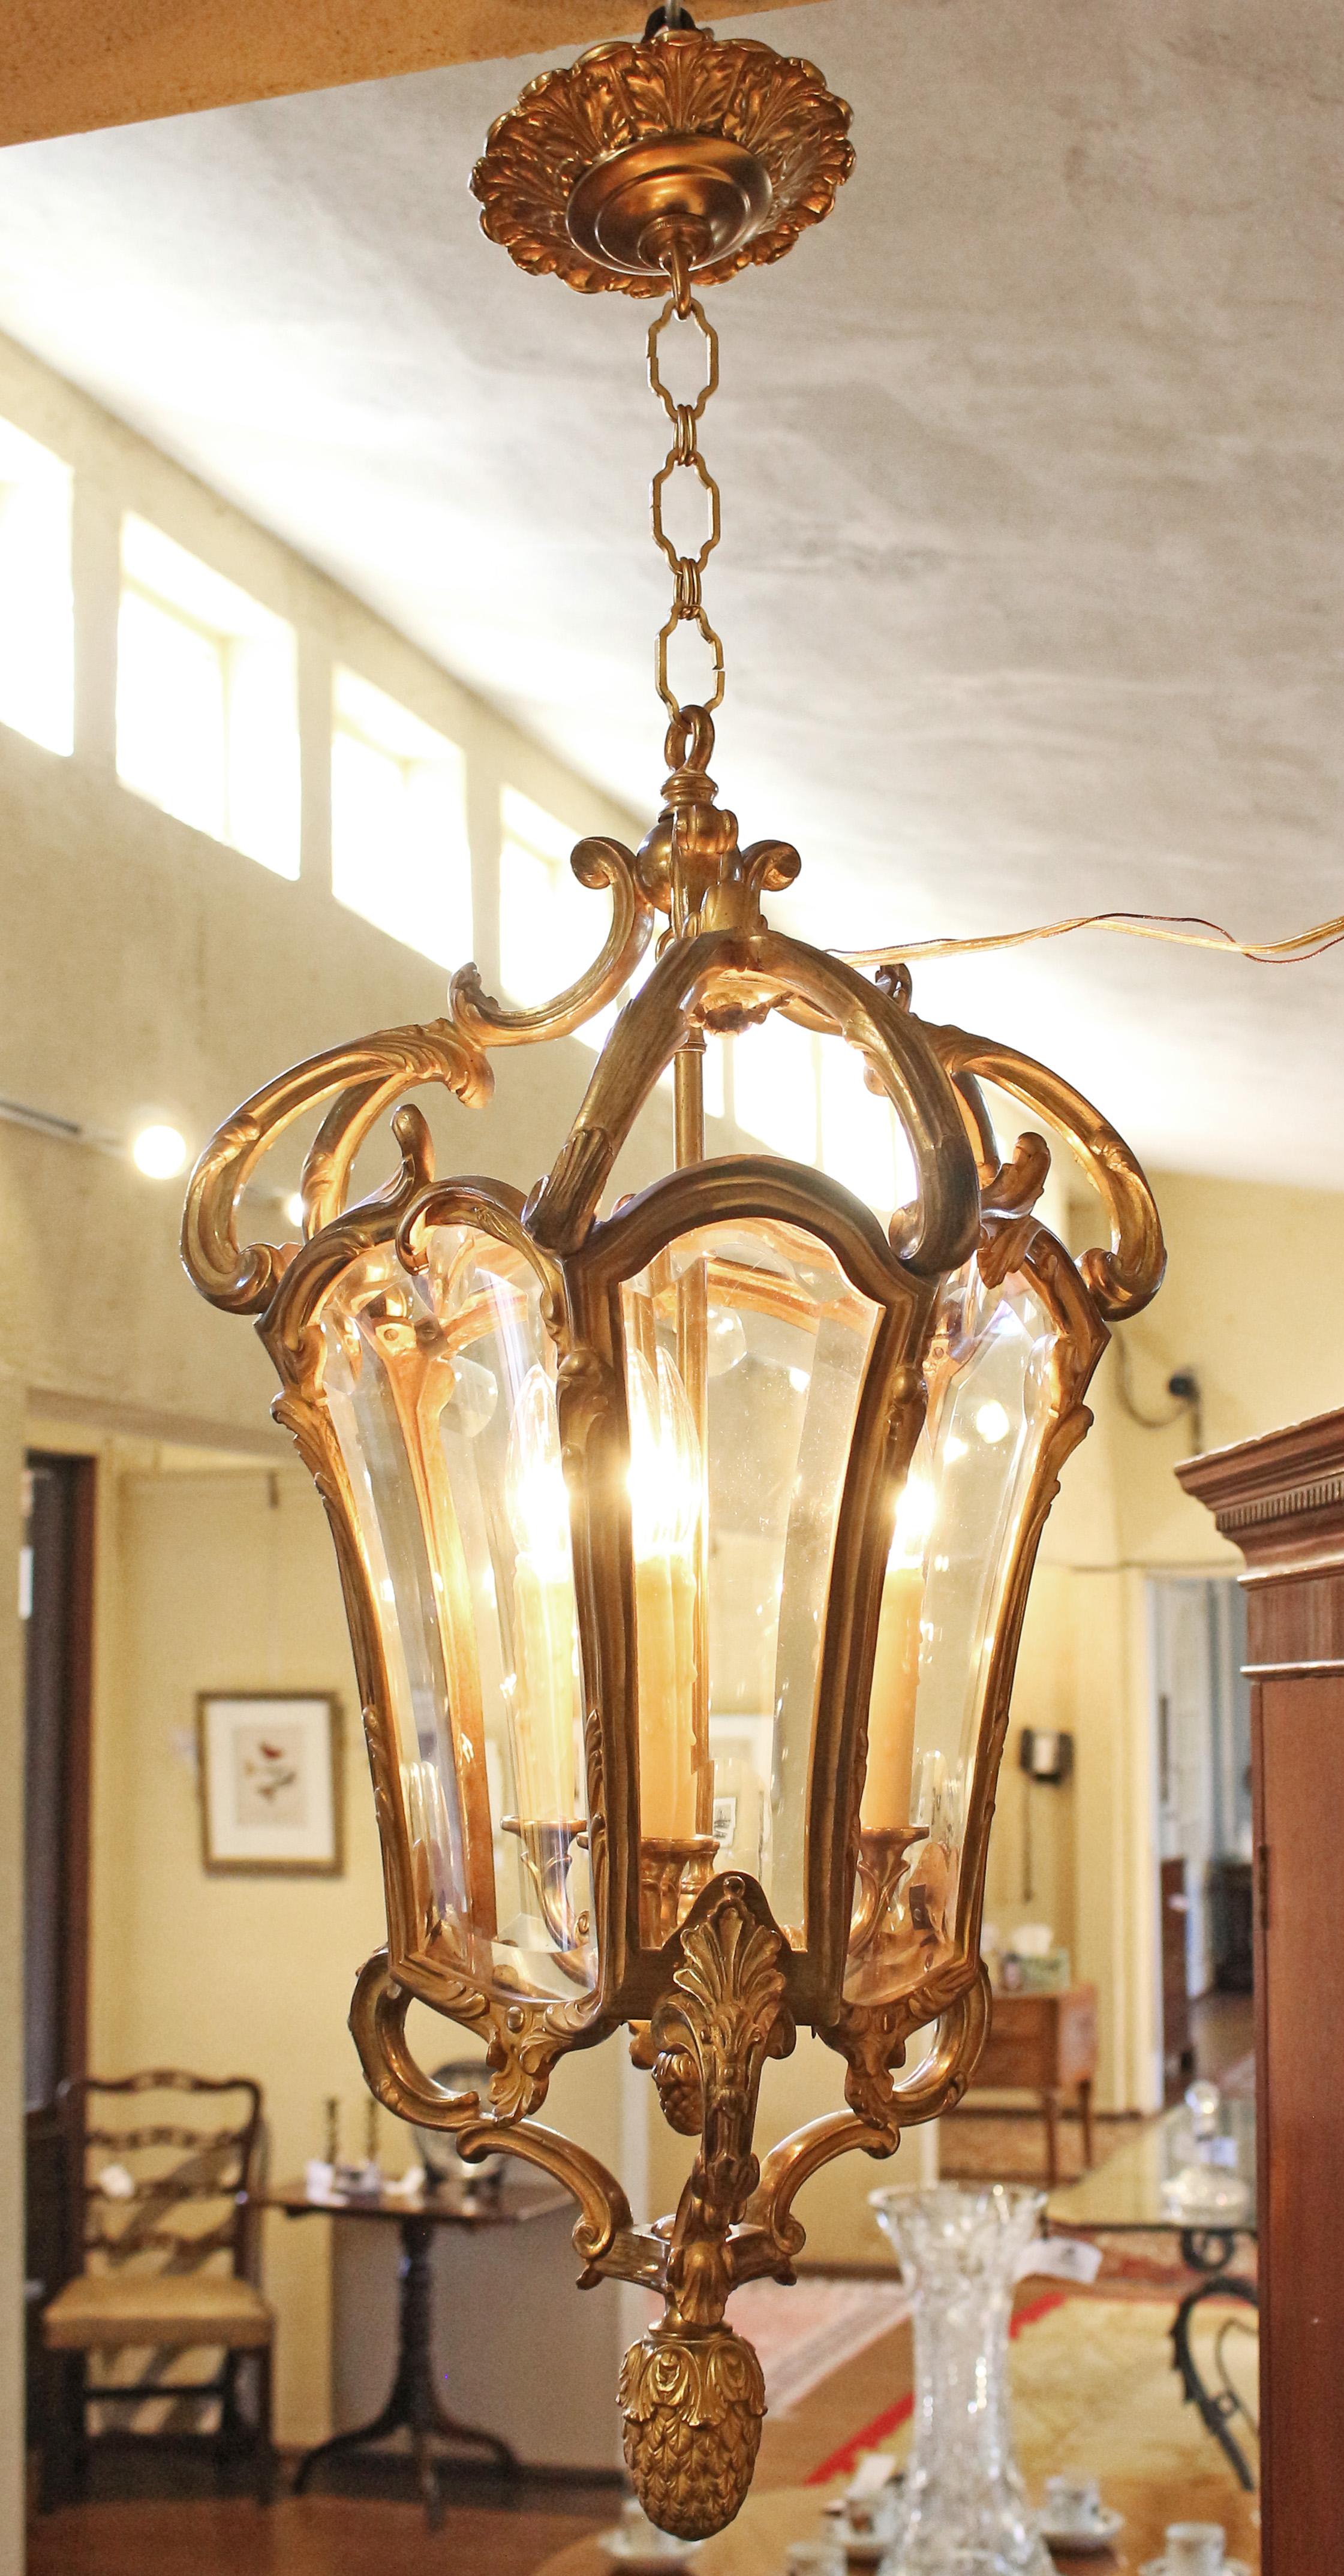 Early 20th Century French Gilt Bronze & Glass Hall Lantern For Sale 7